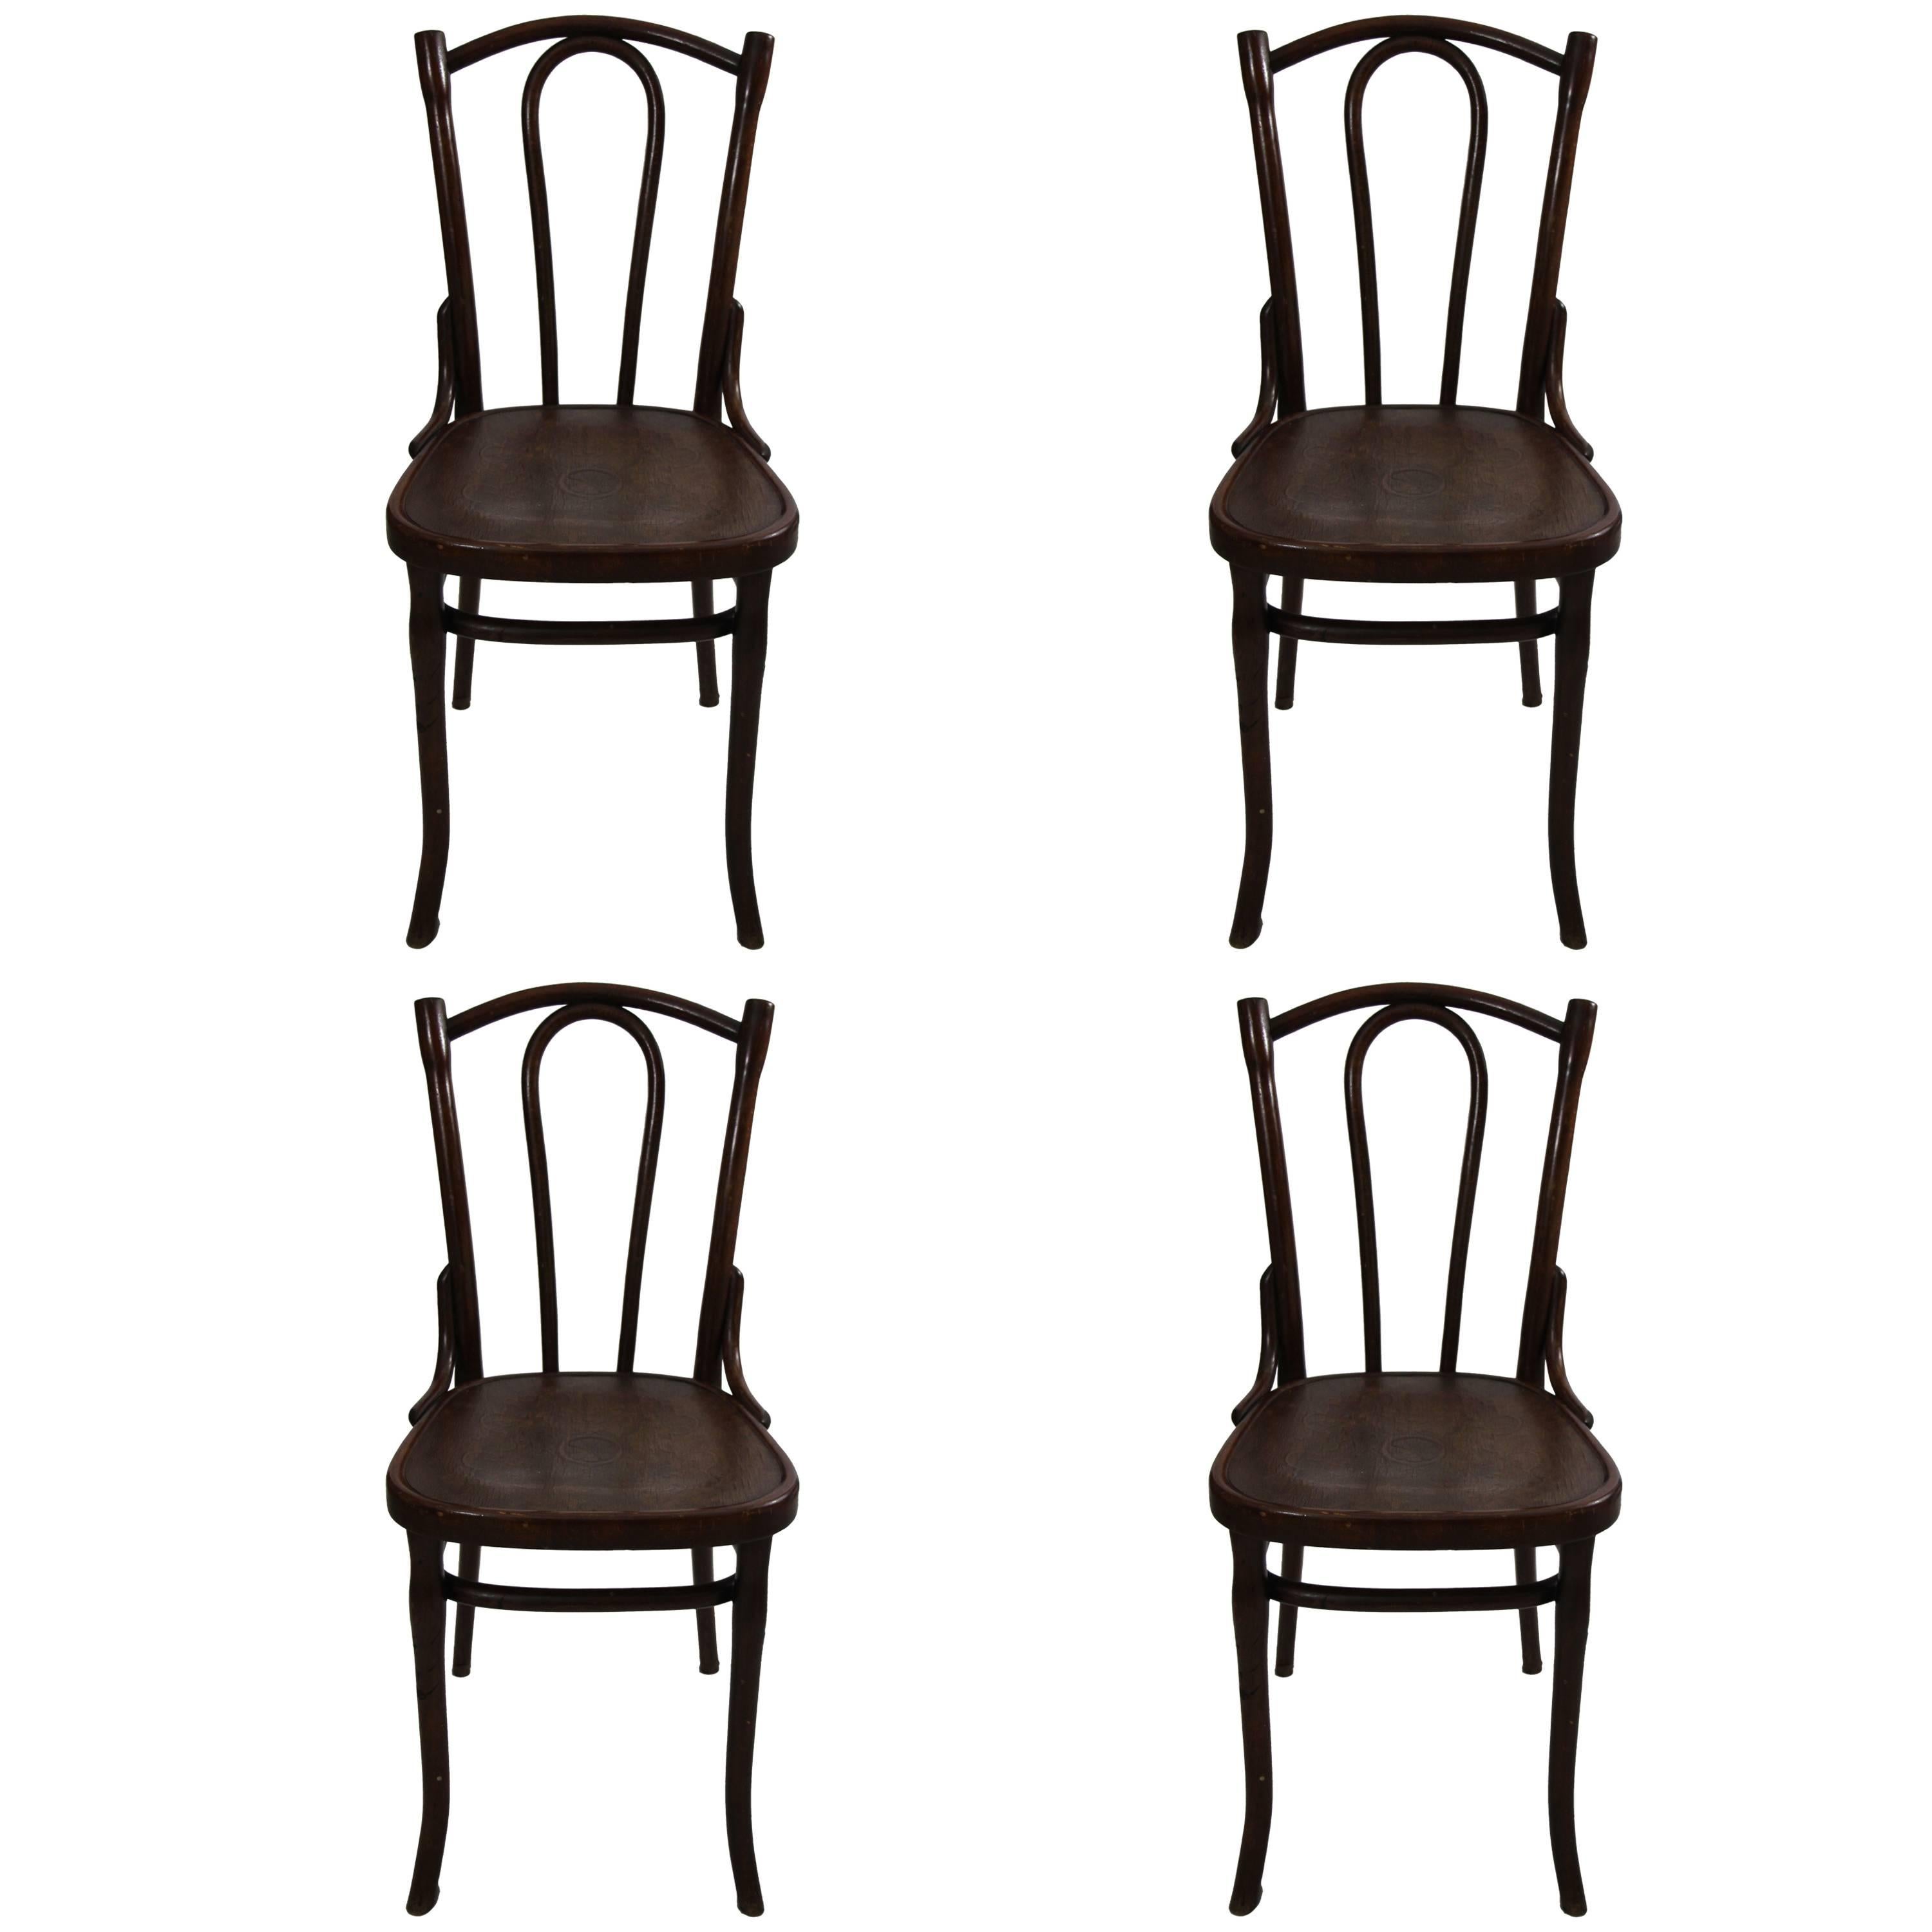 Set of Four Original Thonet Coffee House Chairs